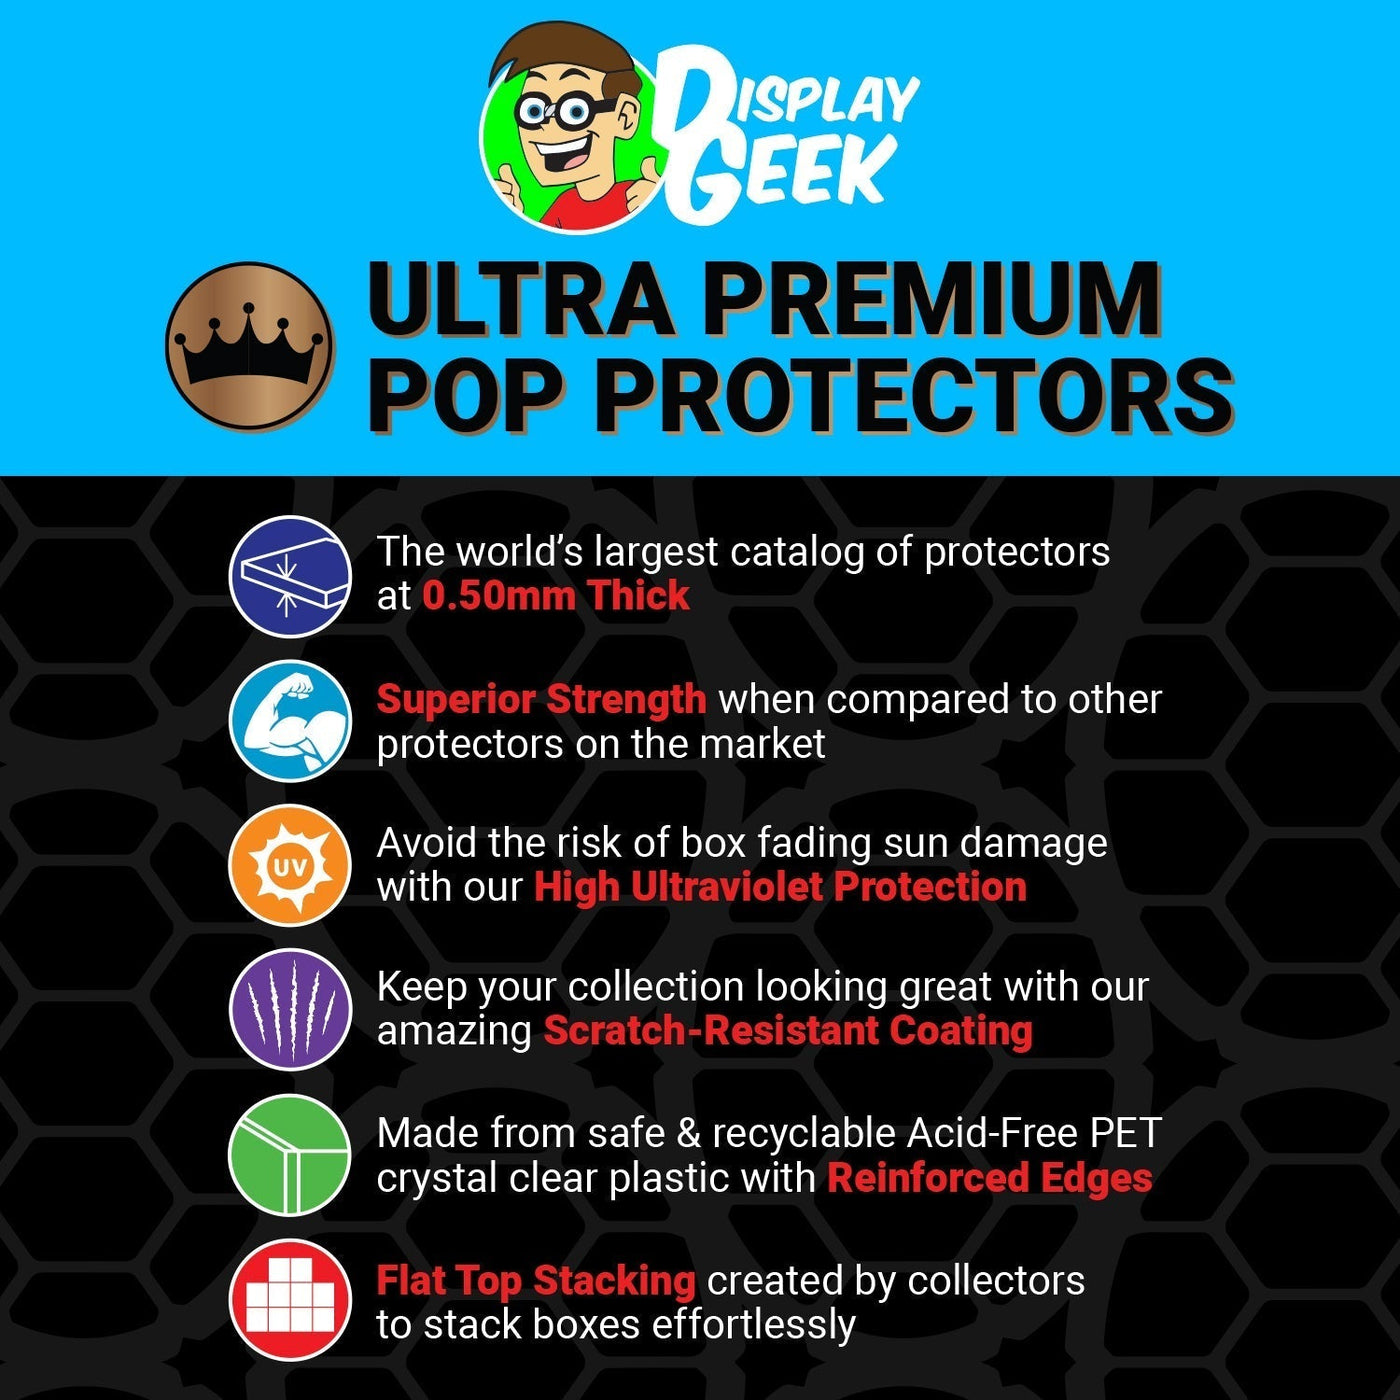 Pop Protector for 2 Pack Captain Marvel vs Chun-Li Funko Pop on The Protector Guide App by Display Geek